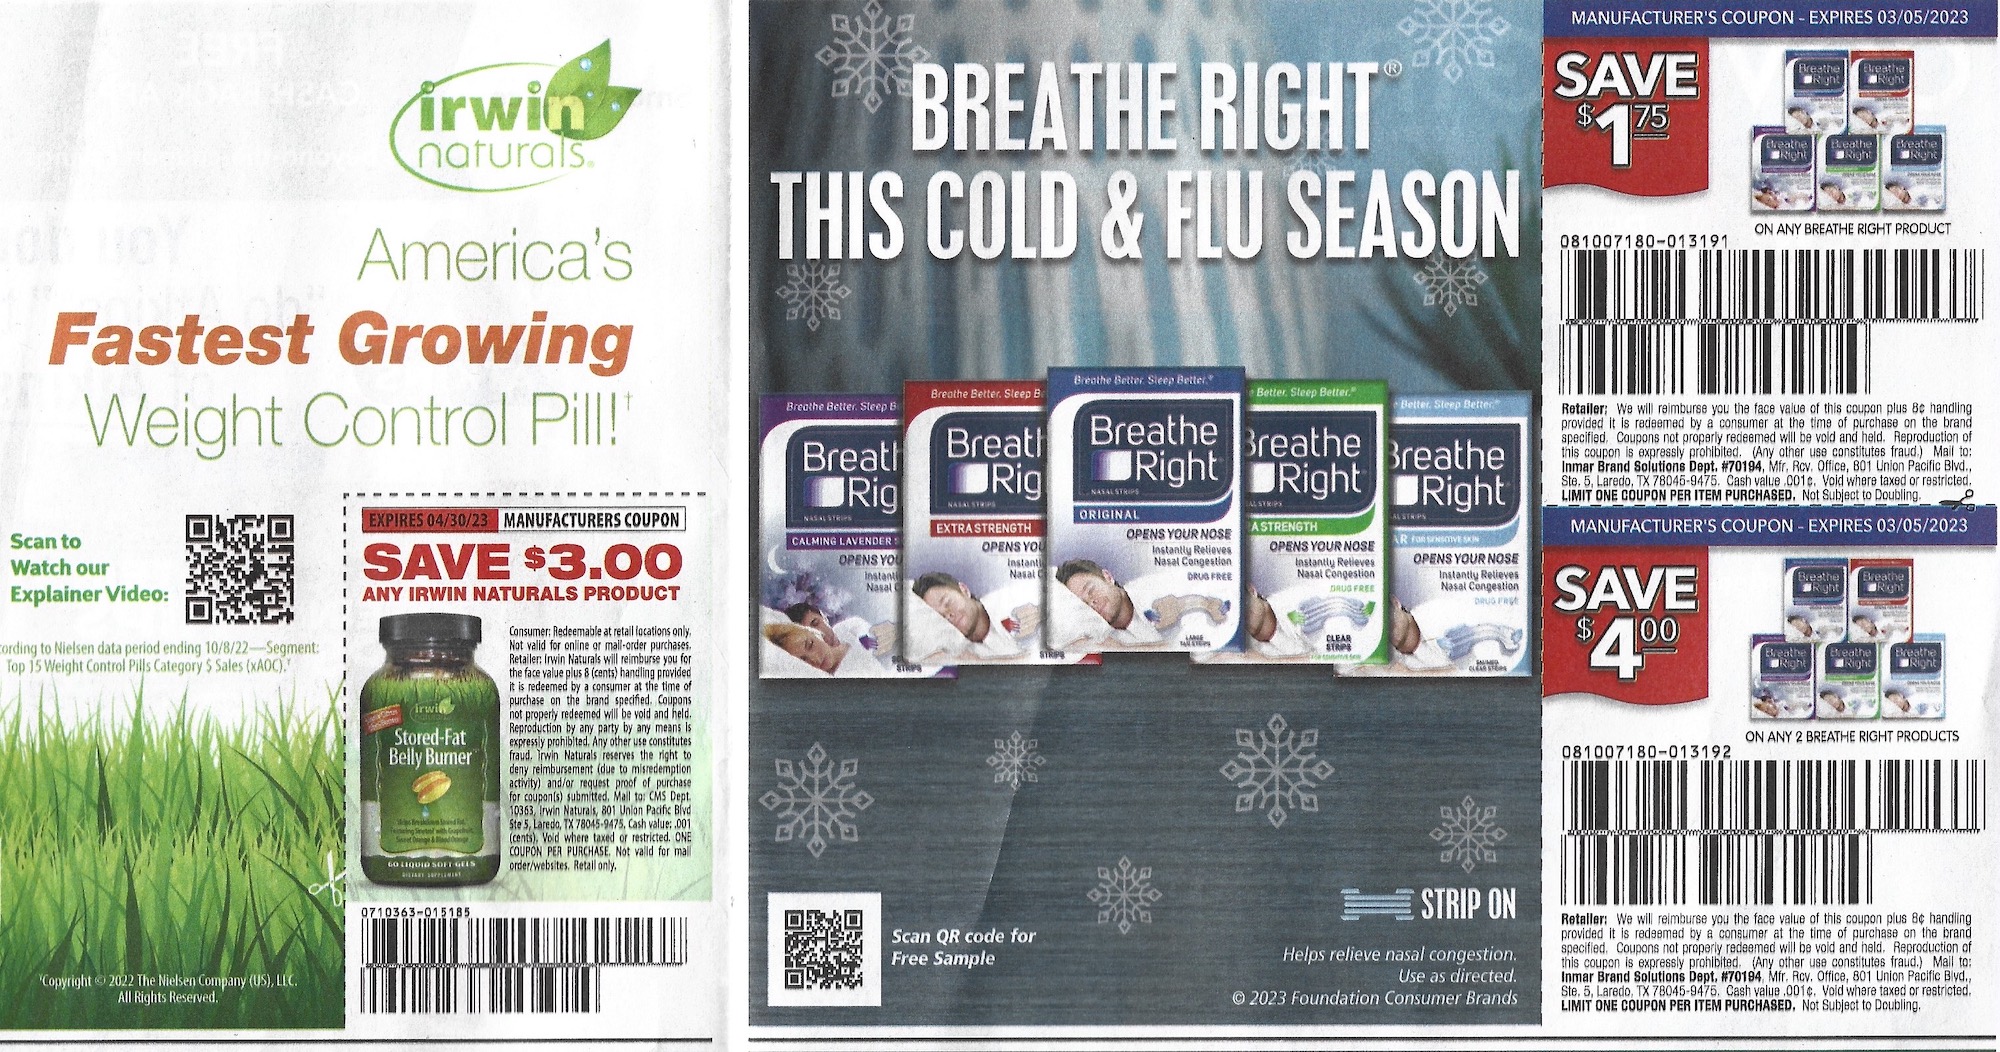 Chicago Tribune Smart Source Coupons January 08 2023 Breathe Right